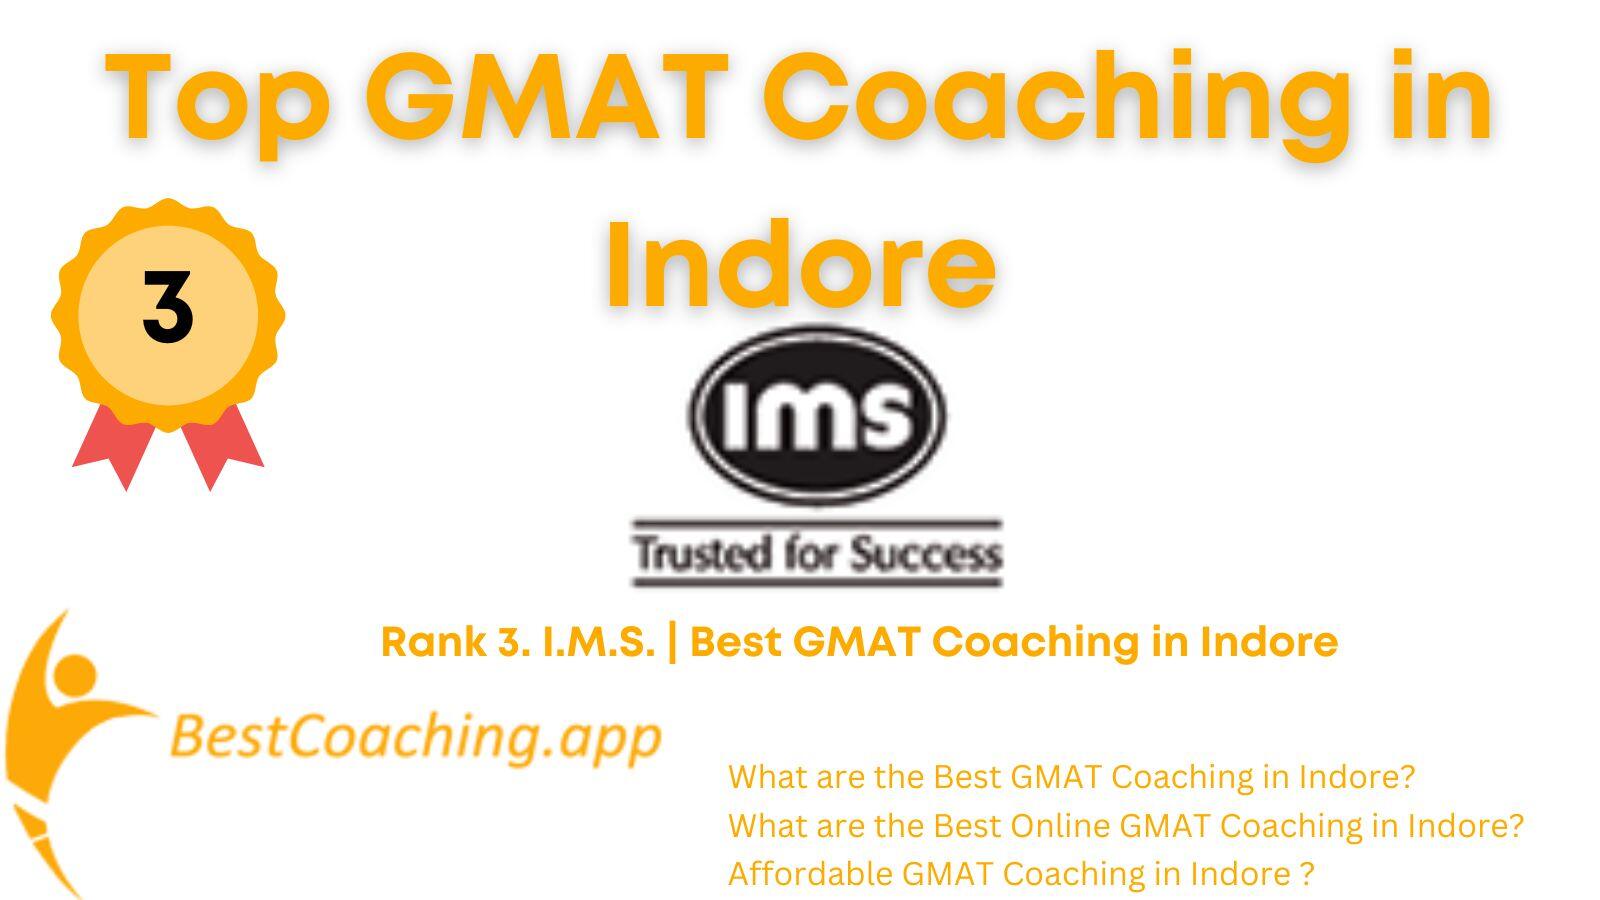 Rank 3. I.M.S. | Best GMAT Coaching in Indore